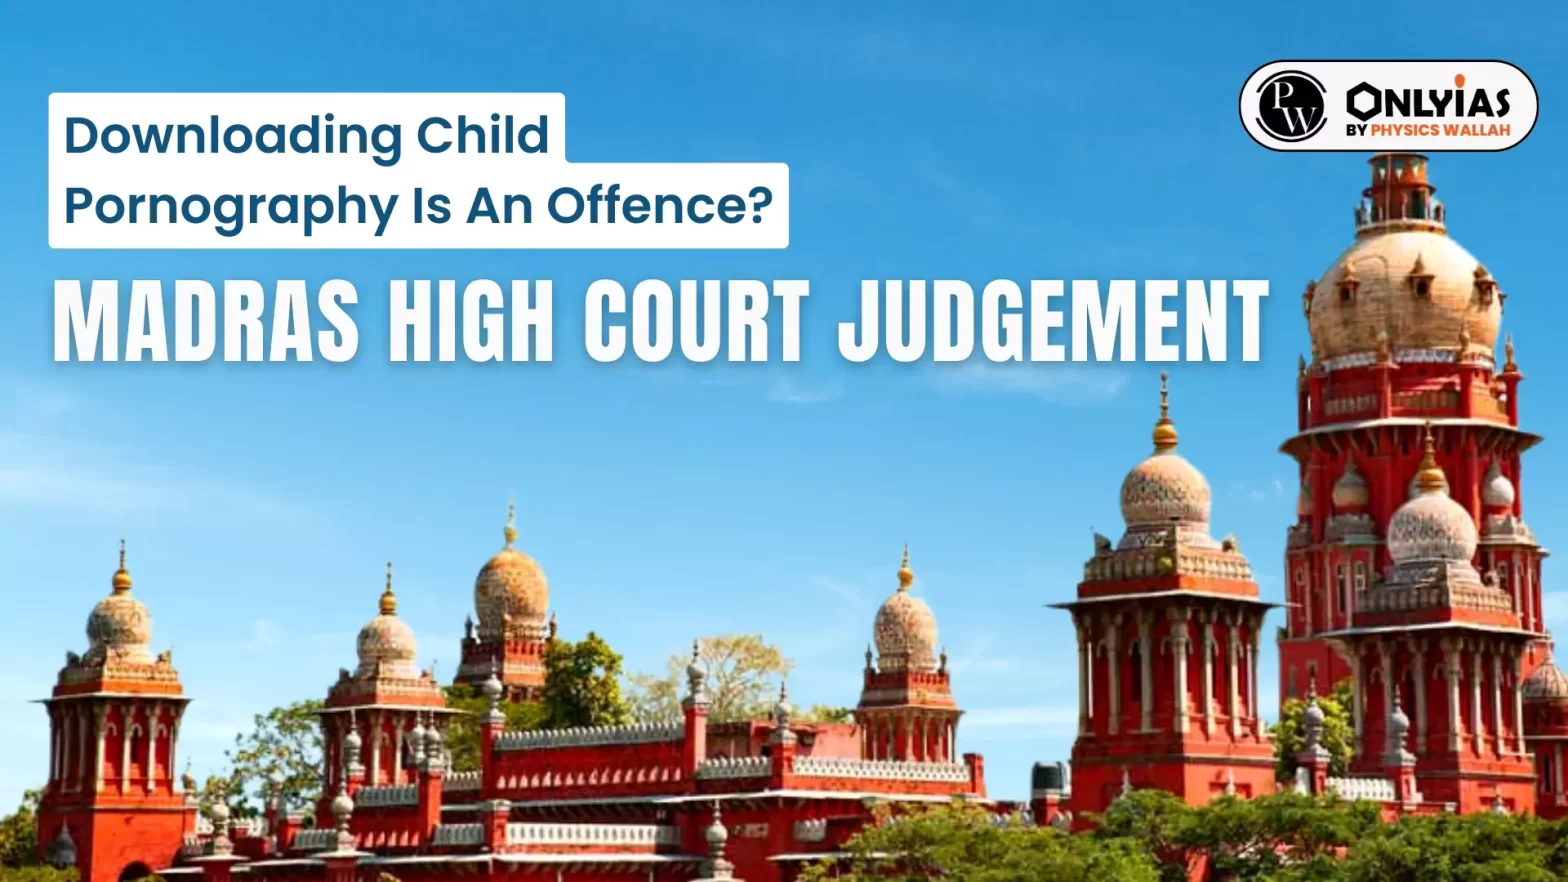 Downloading Child Pornography Is An Offence?: Madras High Court Judgement